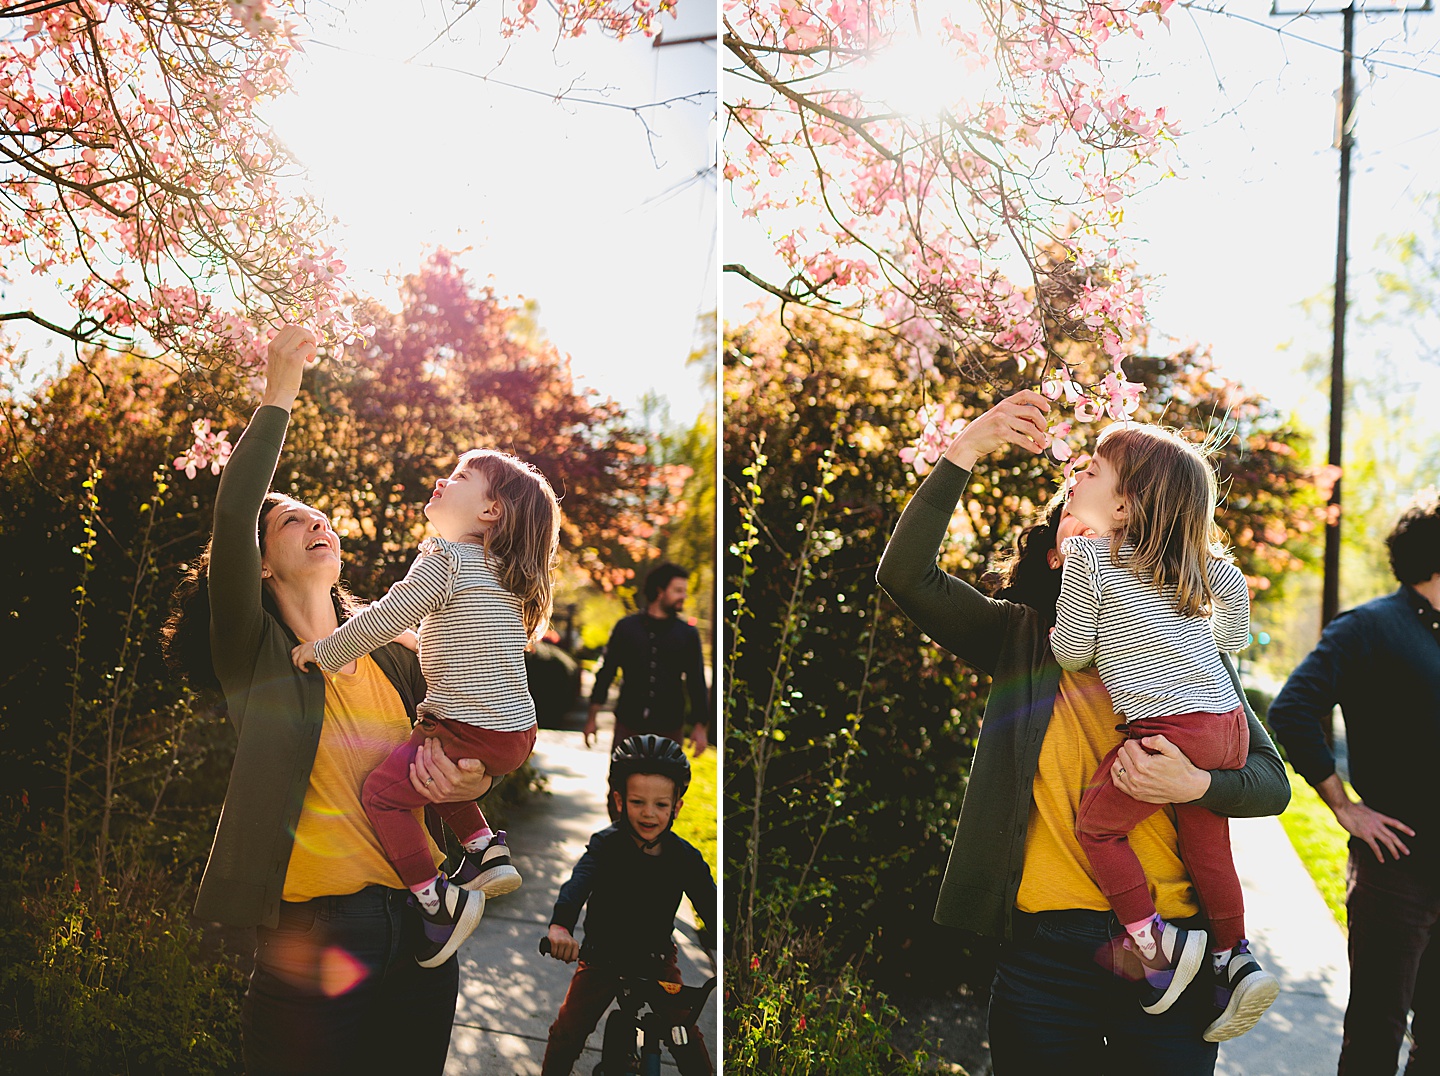 Mom helping daughter smell flowers in tree